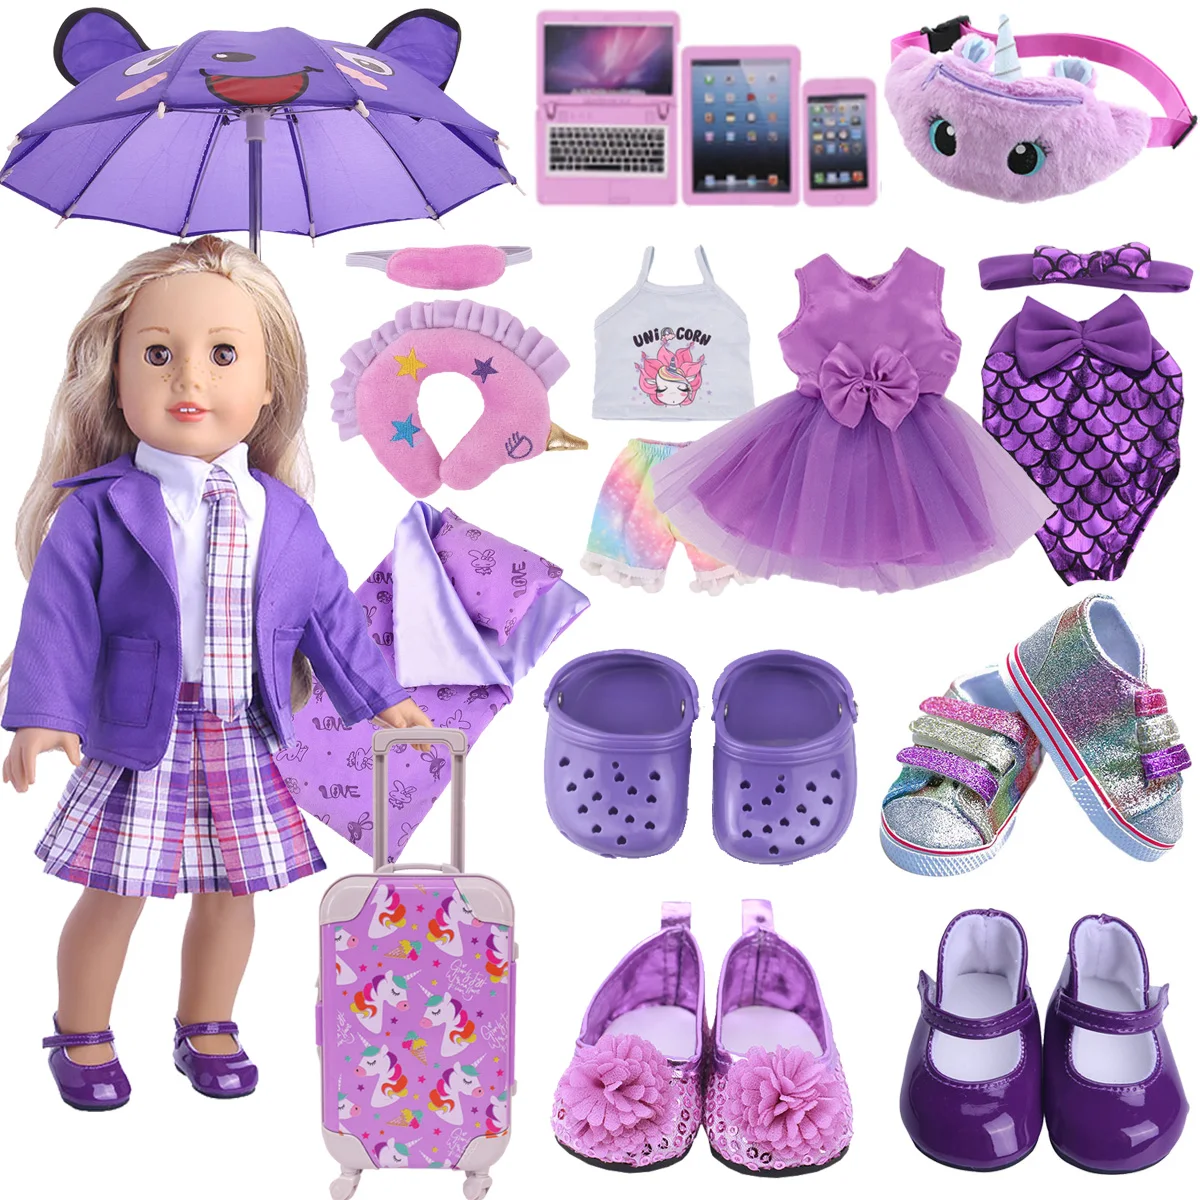 Doll Clothes Purple Series Dsinesy Unicorn Dress Doll Shoes For 18 Inch American&43m Reborn Baby Reborn New Born Doll Girl's Toy